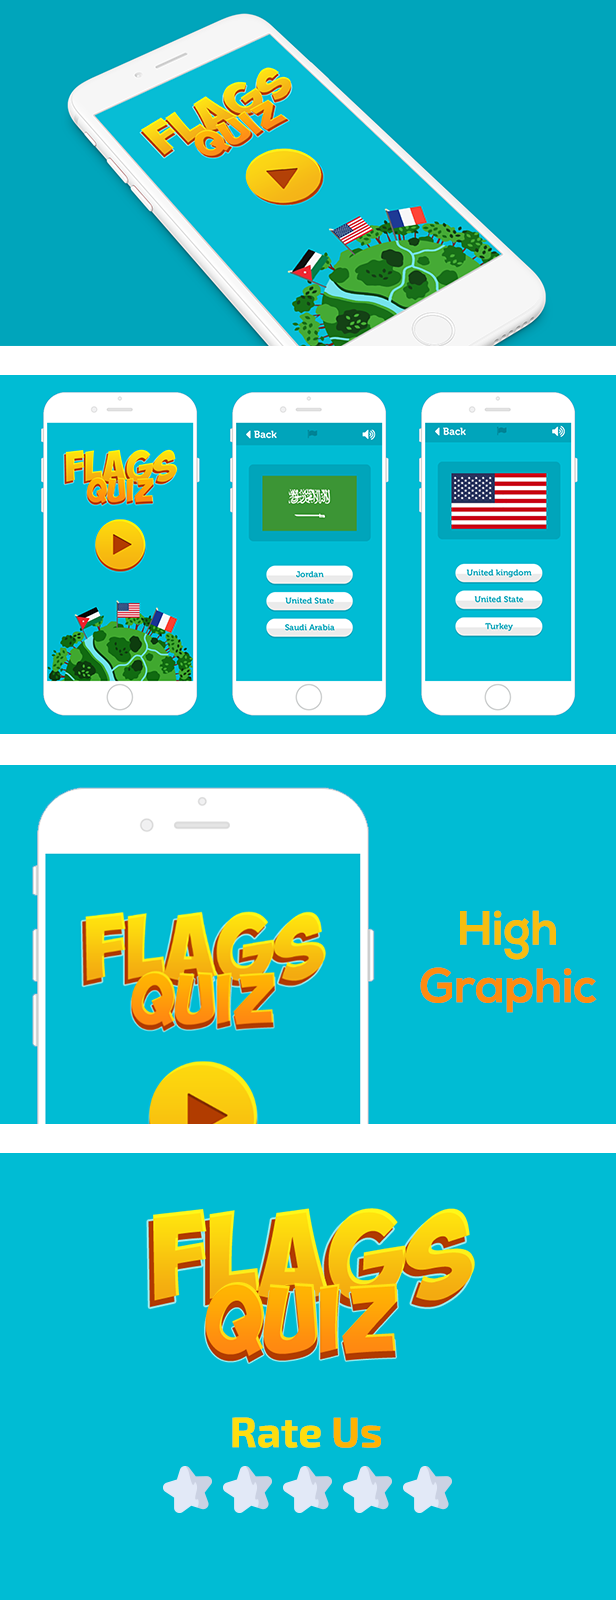 FLAGS QUIZ WITH ADMOB - ANDROID STUDIO & ECLIPSE FILE - 2